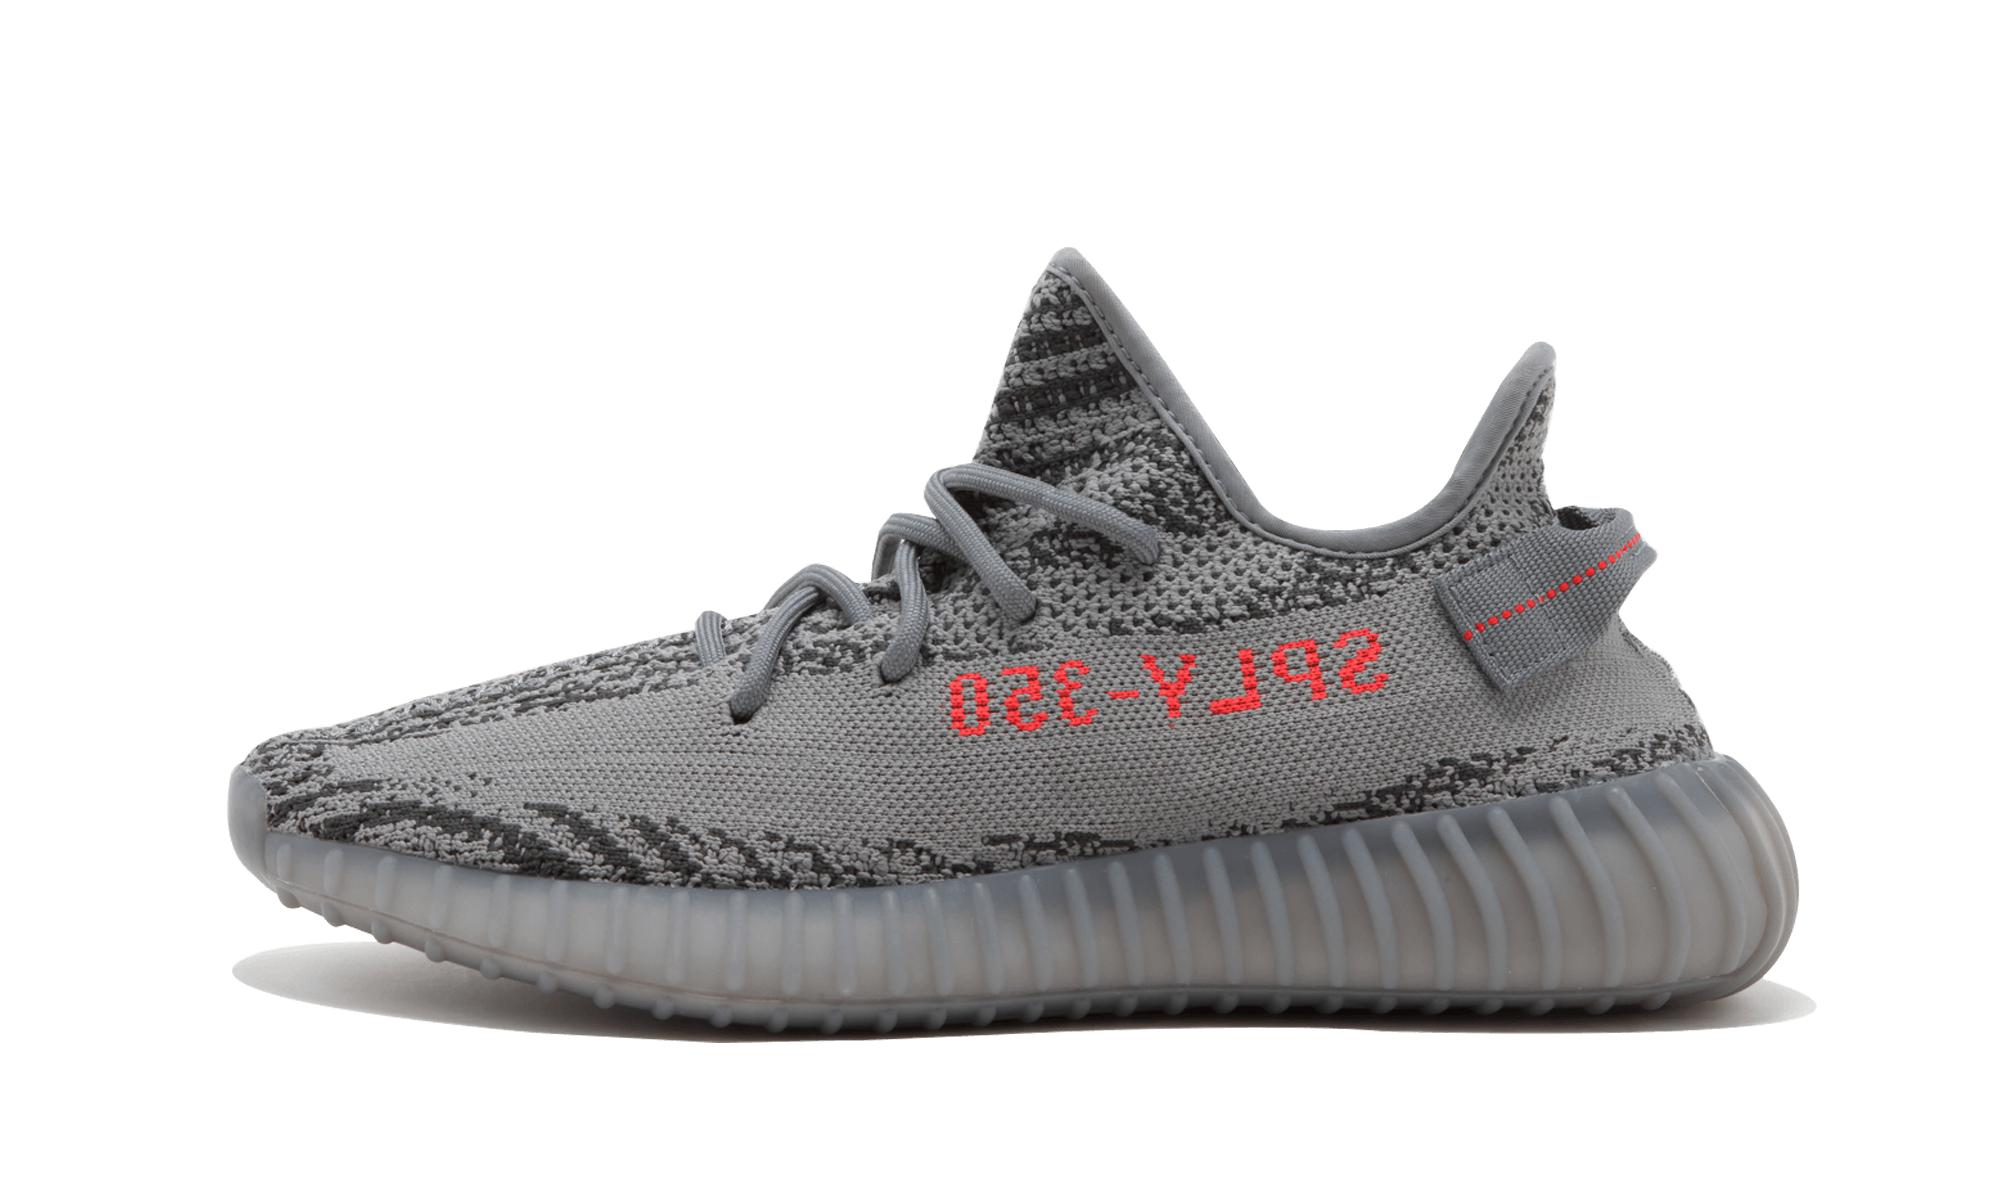 Adidas Yeezy Boost 350 V2 Carbon, All sizes - www